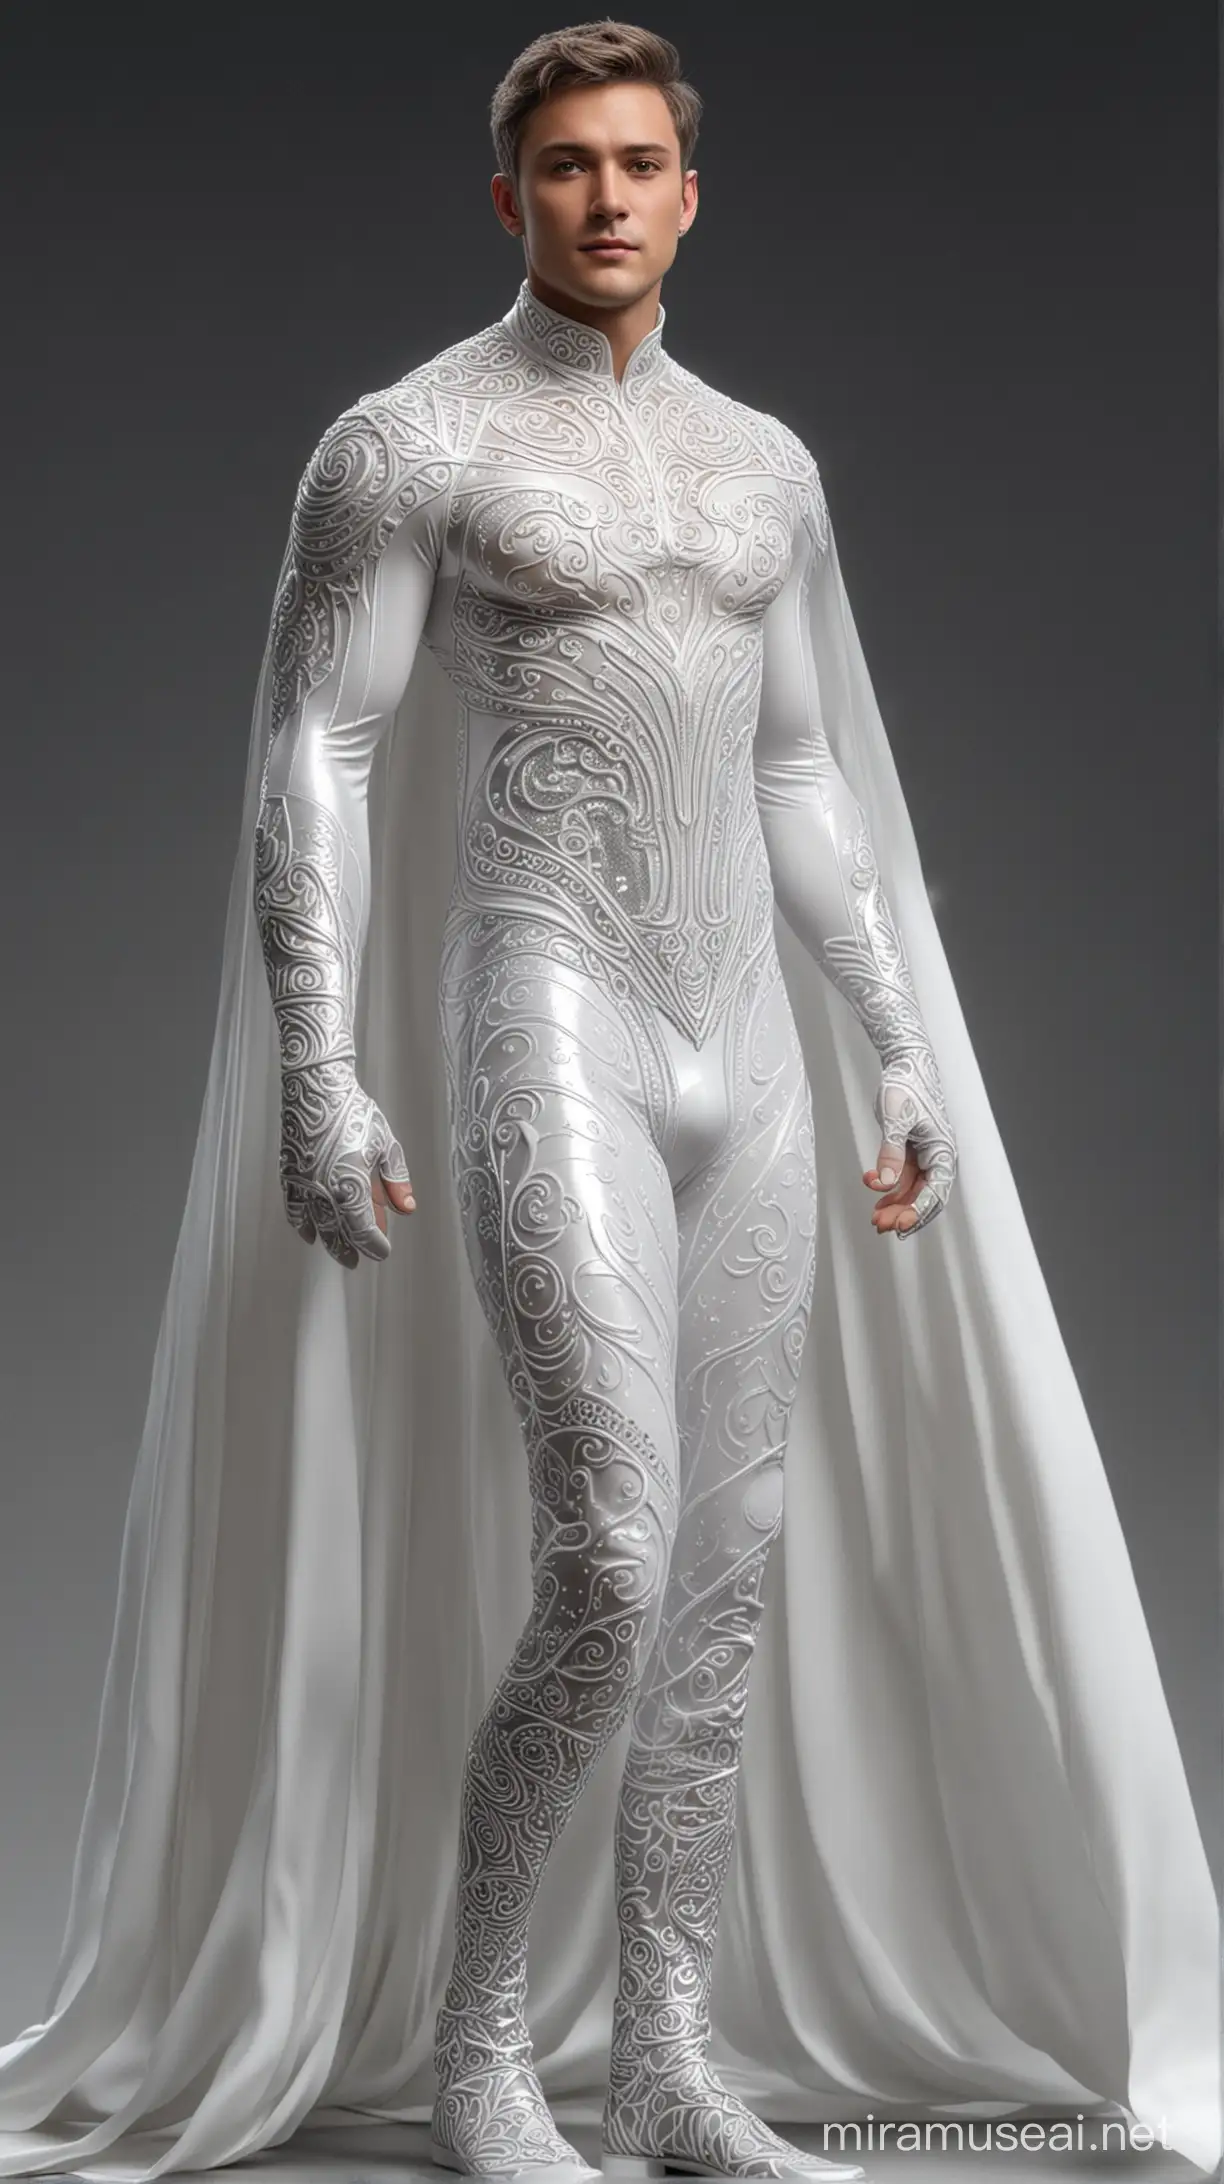  Full full body photorealistic ultra realism high definition aesthetic stabilized diffusion picture of handsome hunky fractal clean shaven  Zayne as celestial Teng, wearing white and silver waves filigree sparkling biomorphic transparent overall tight fit spandex and gloves. White cape, standing firmly,, hand on the hips.